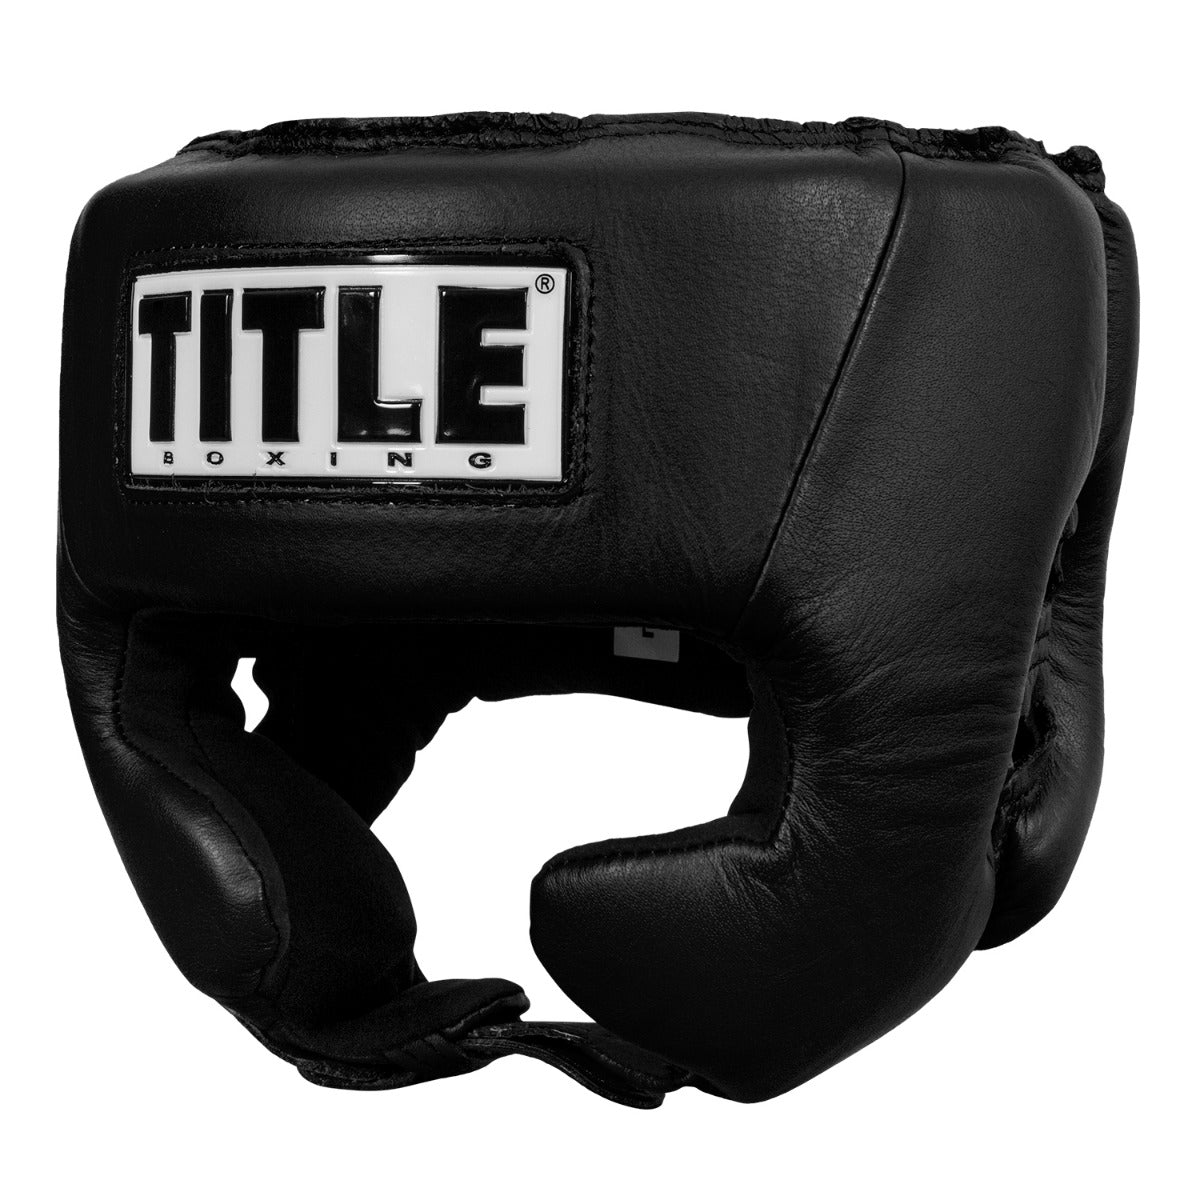 TITLE USA Boxing Competition Headgear - With Cheeks